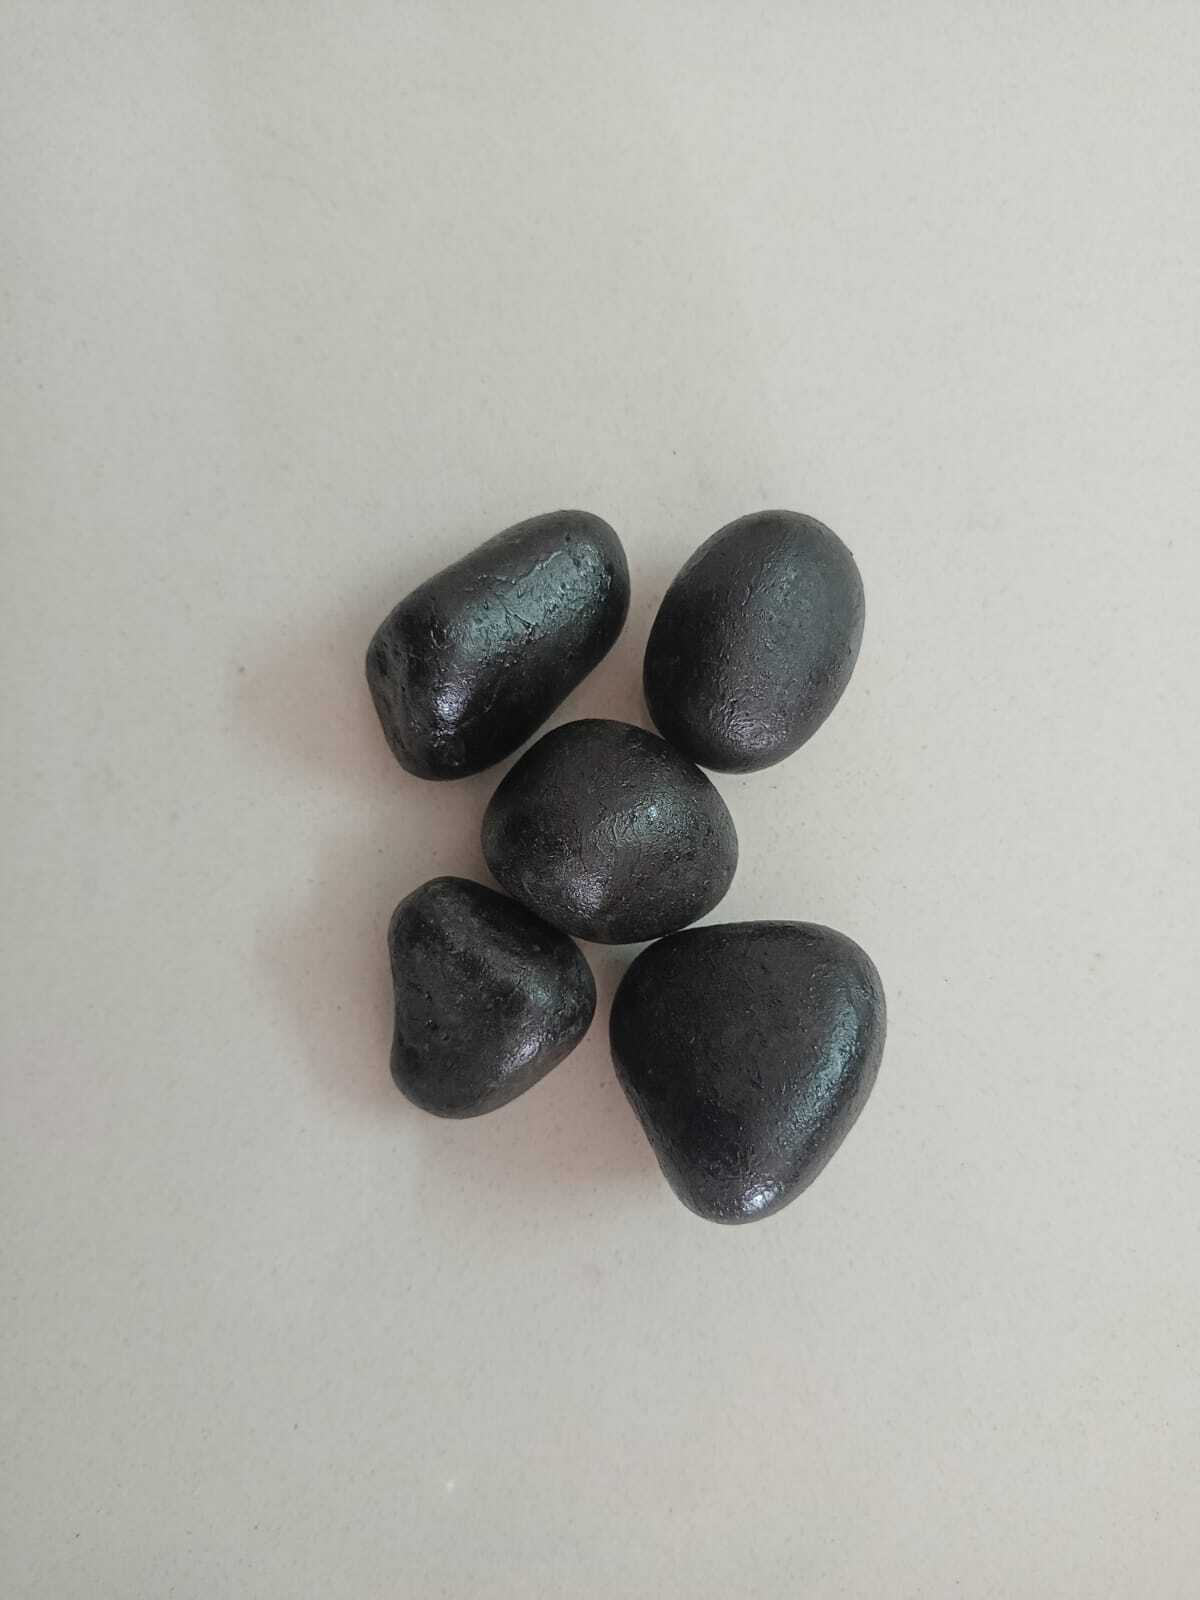 lemon lellow and dark yellow color coating high polished smooth pebble 1-3 cm best for decoration home and garden office